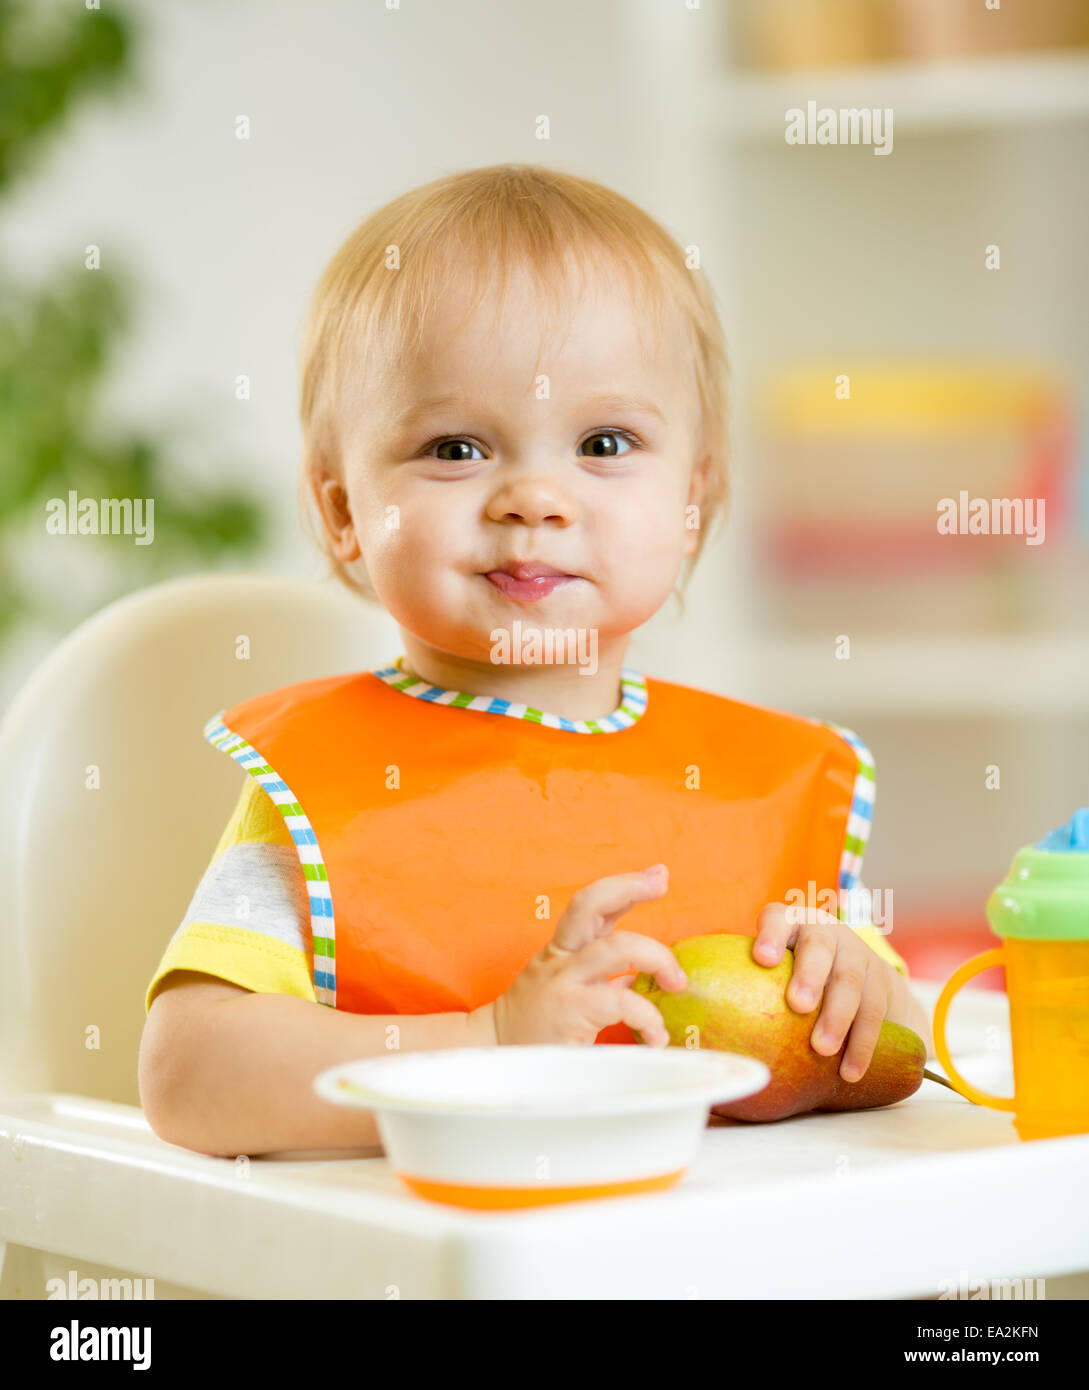 happy baby kid boy toddler eating itself with spoon Stock Photo